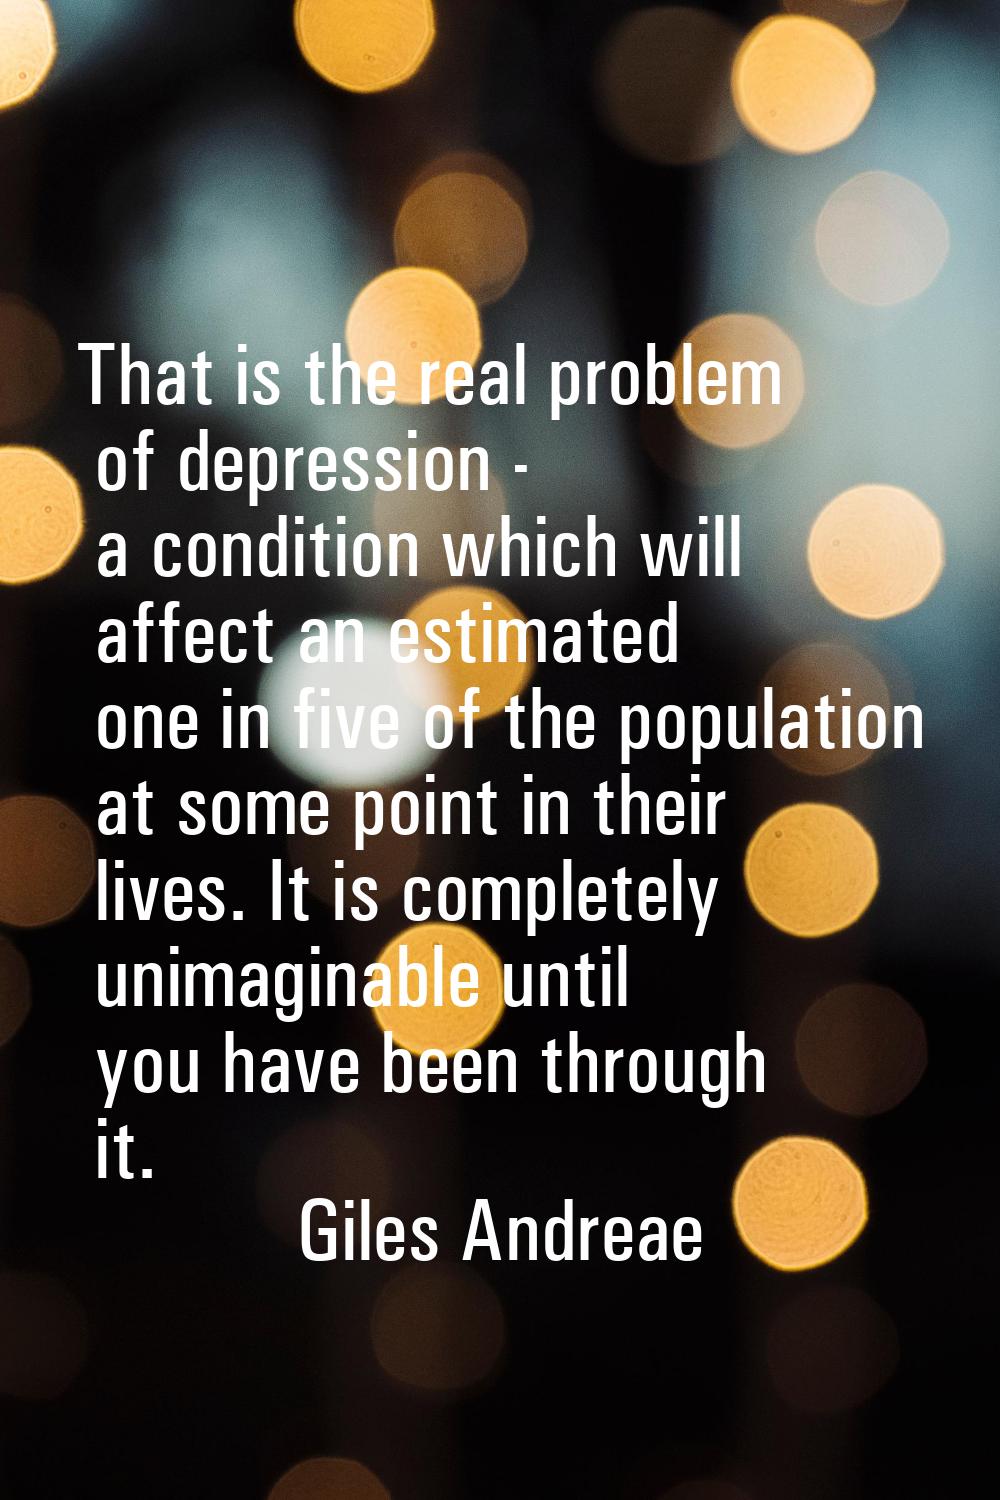 That is the real problem of depression - a condition which will affect an estimated one in five of 